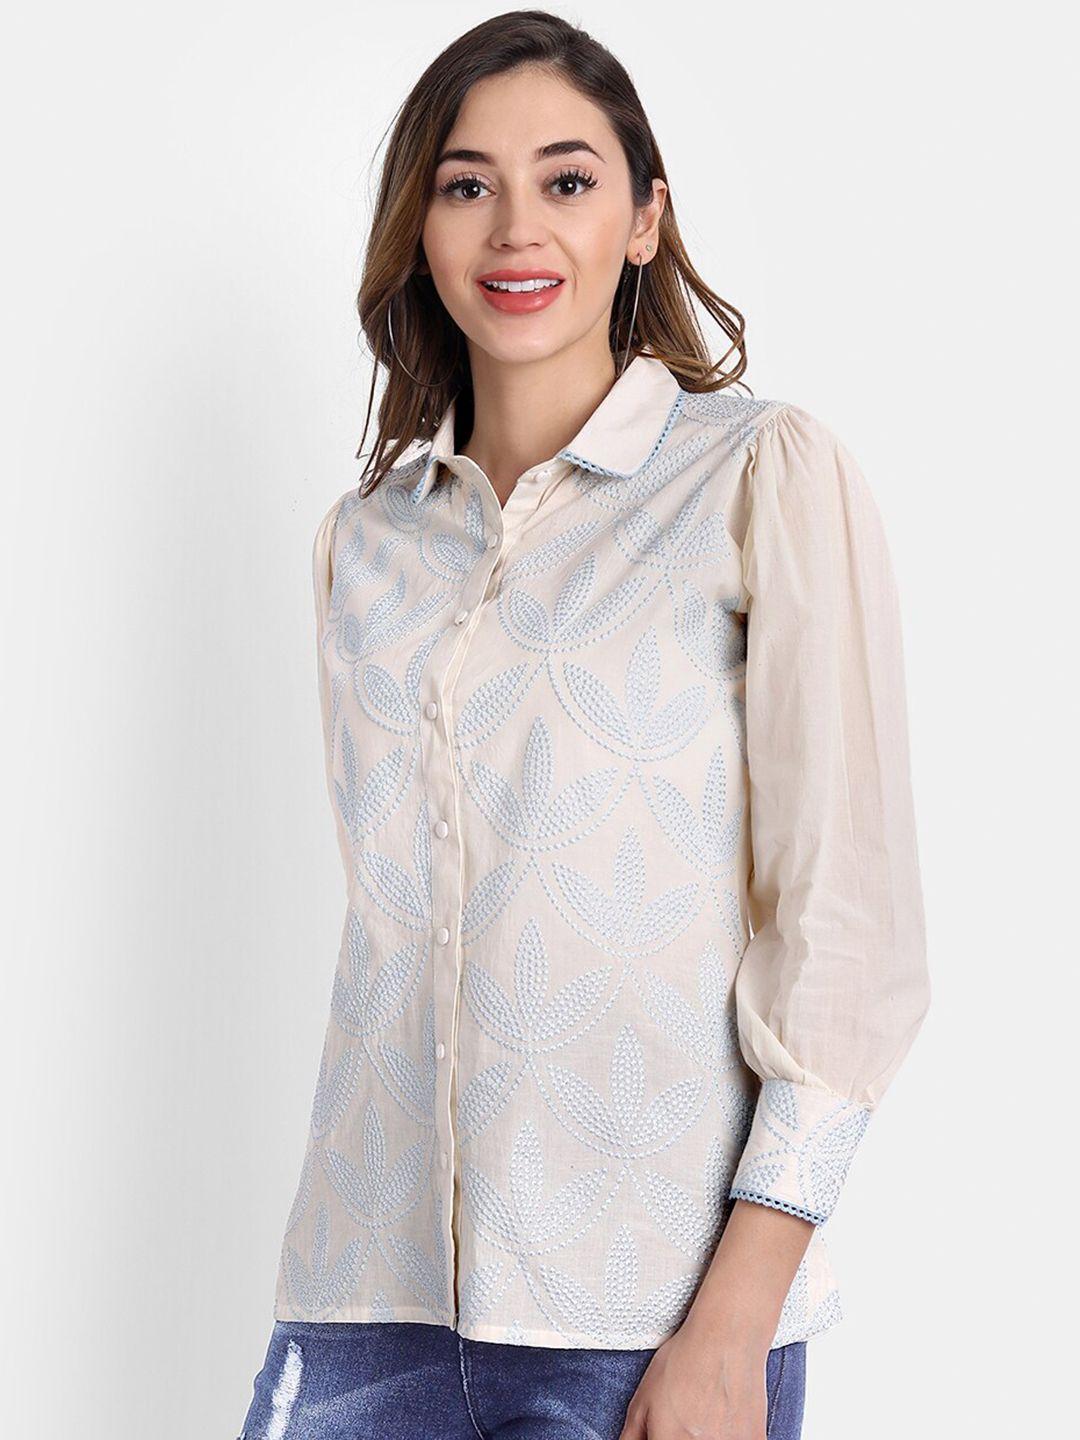 hk colours of fashion off white & blue embroidered cotton shirt style top